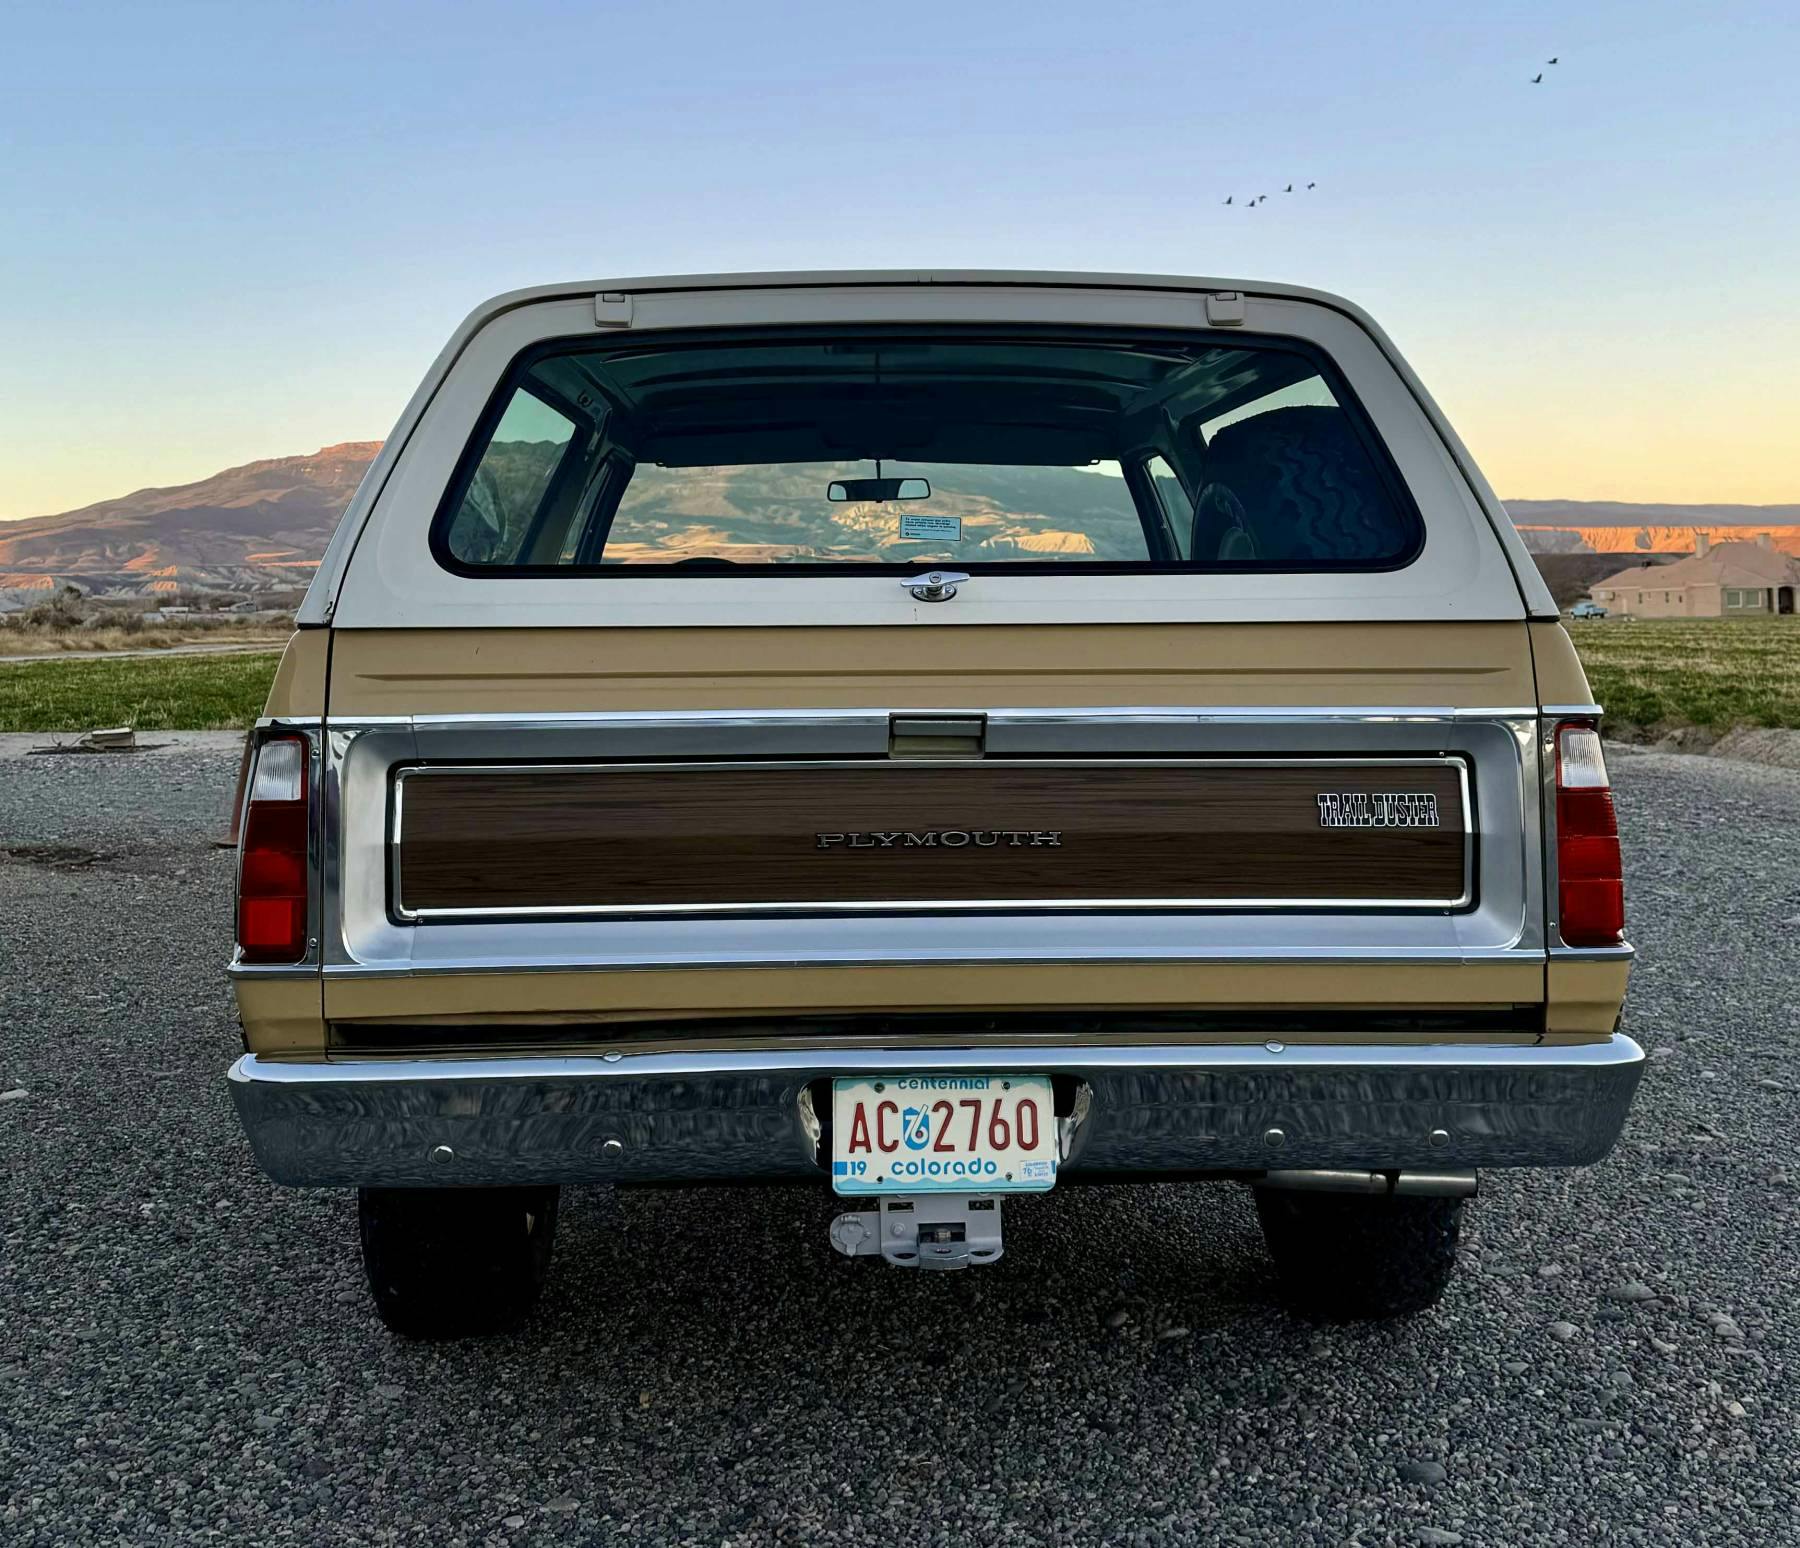 1976 Plymouth Trail Duster rear